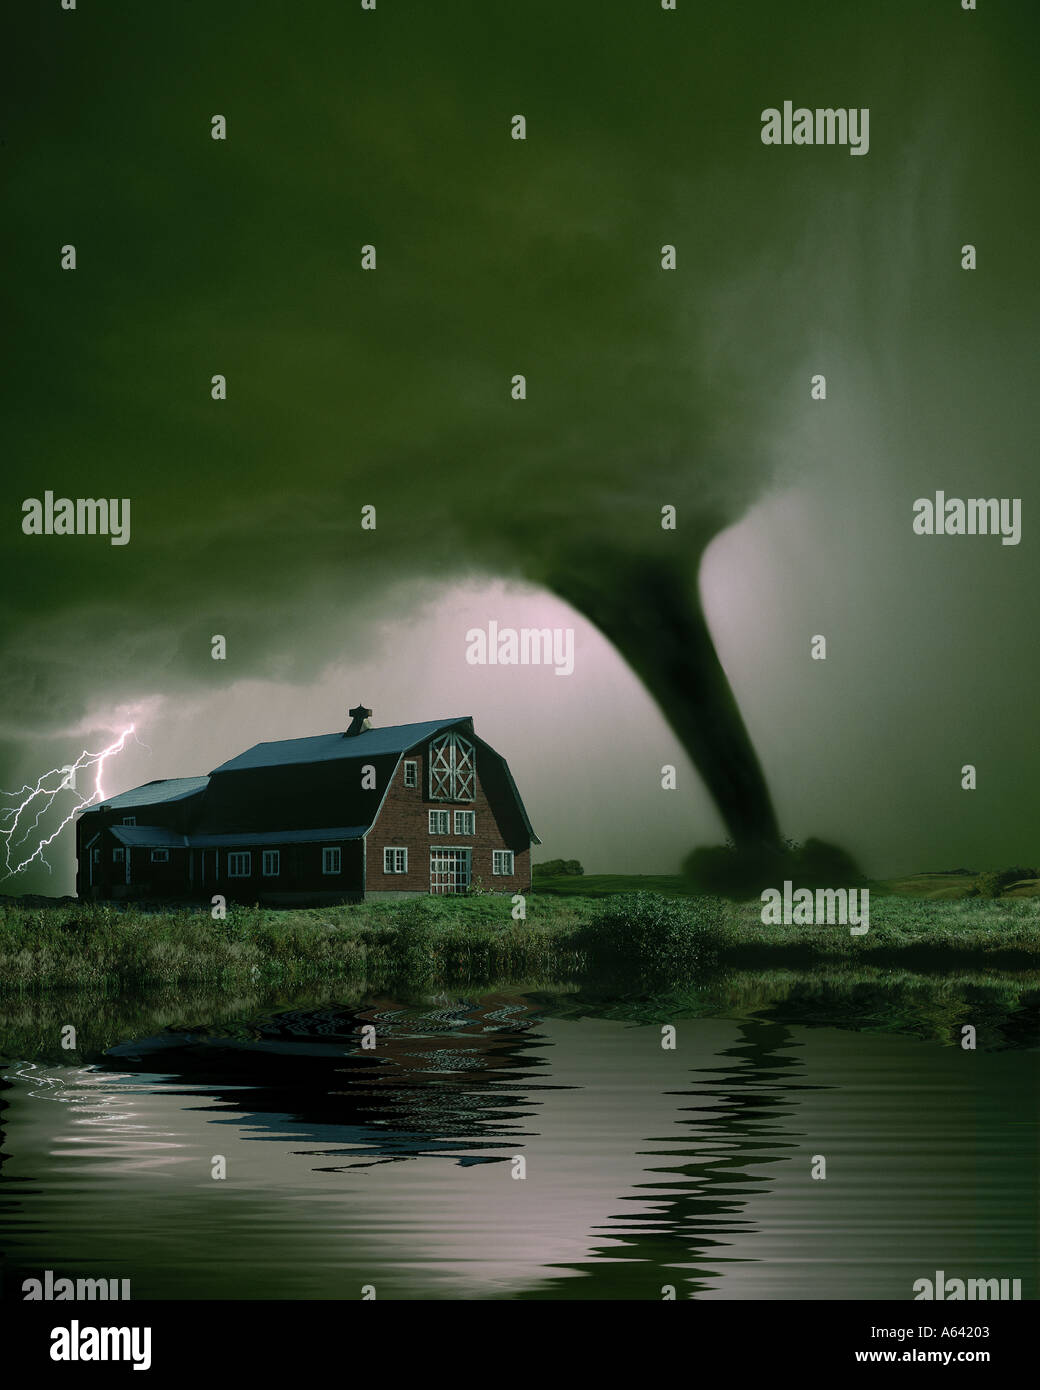 Tornado and severe weather conditions over farm Stock Photo